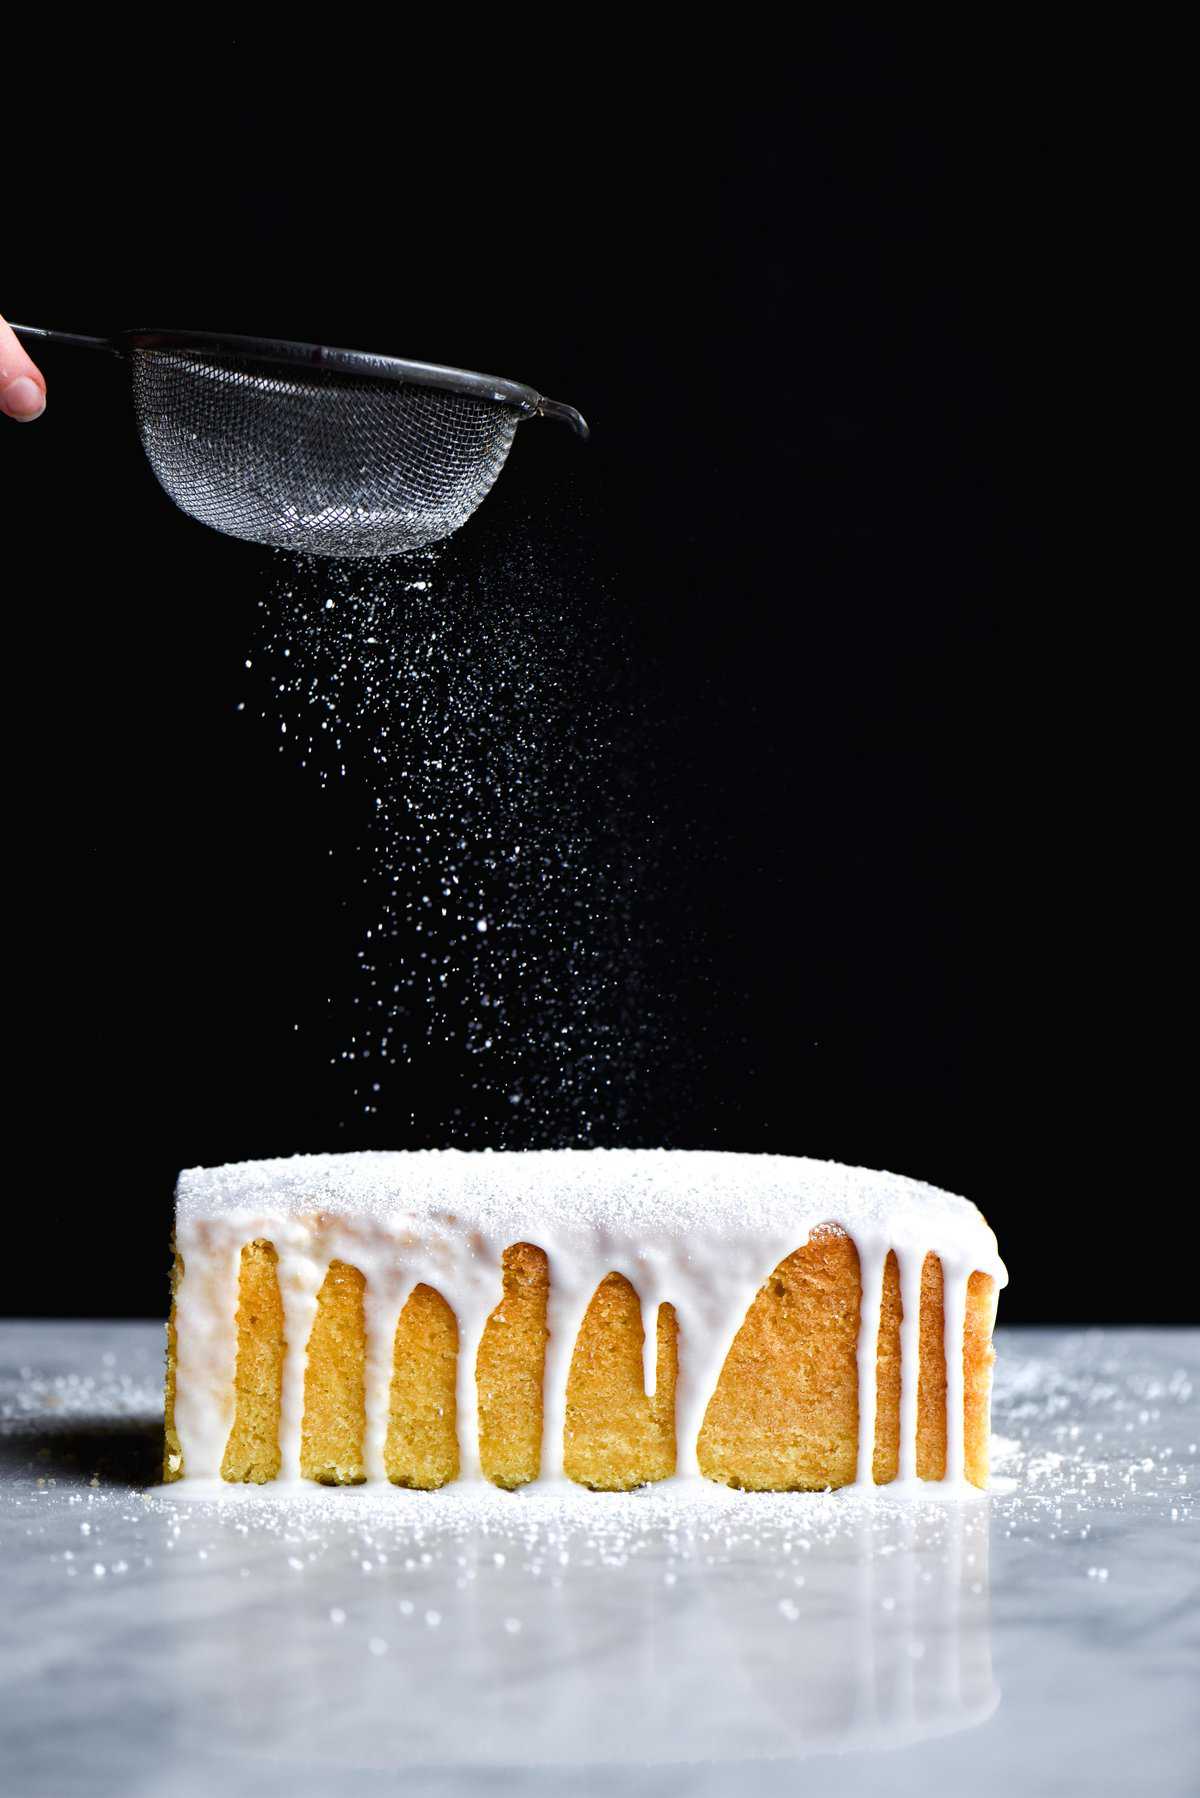 A side on view of a gluten free drizzle cake being sprinkled with icing sugar against a dark backdrop